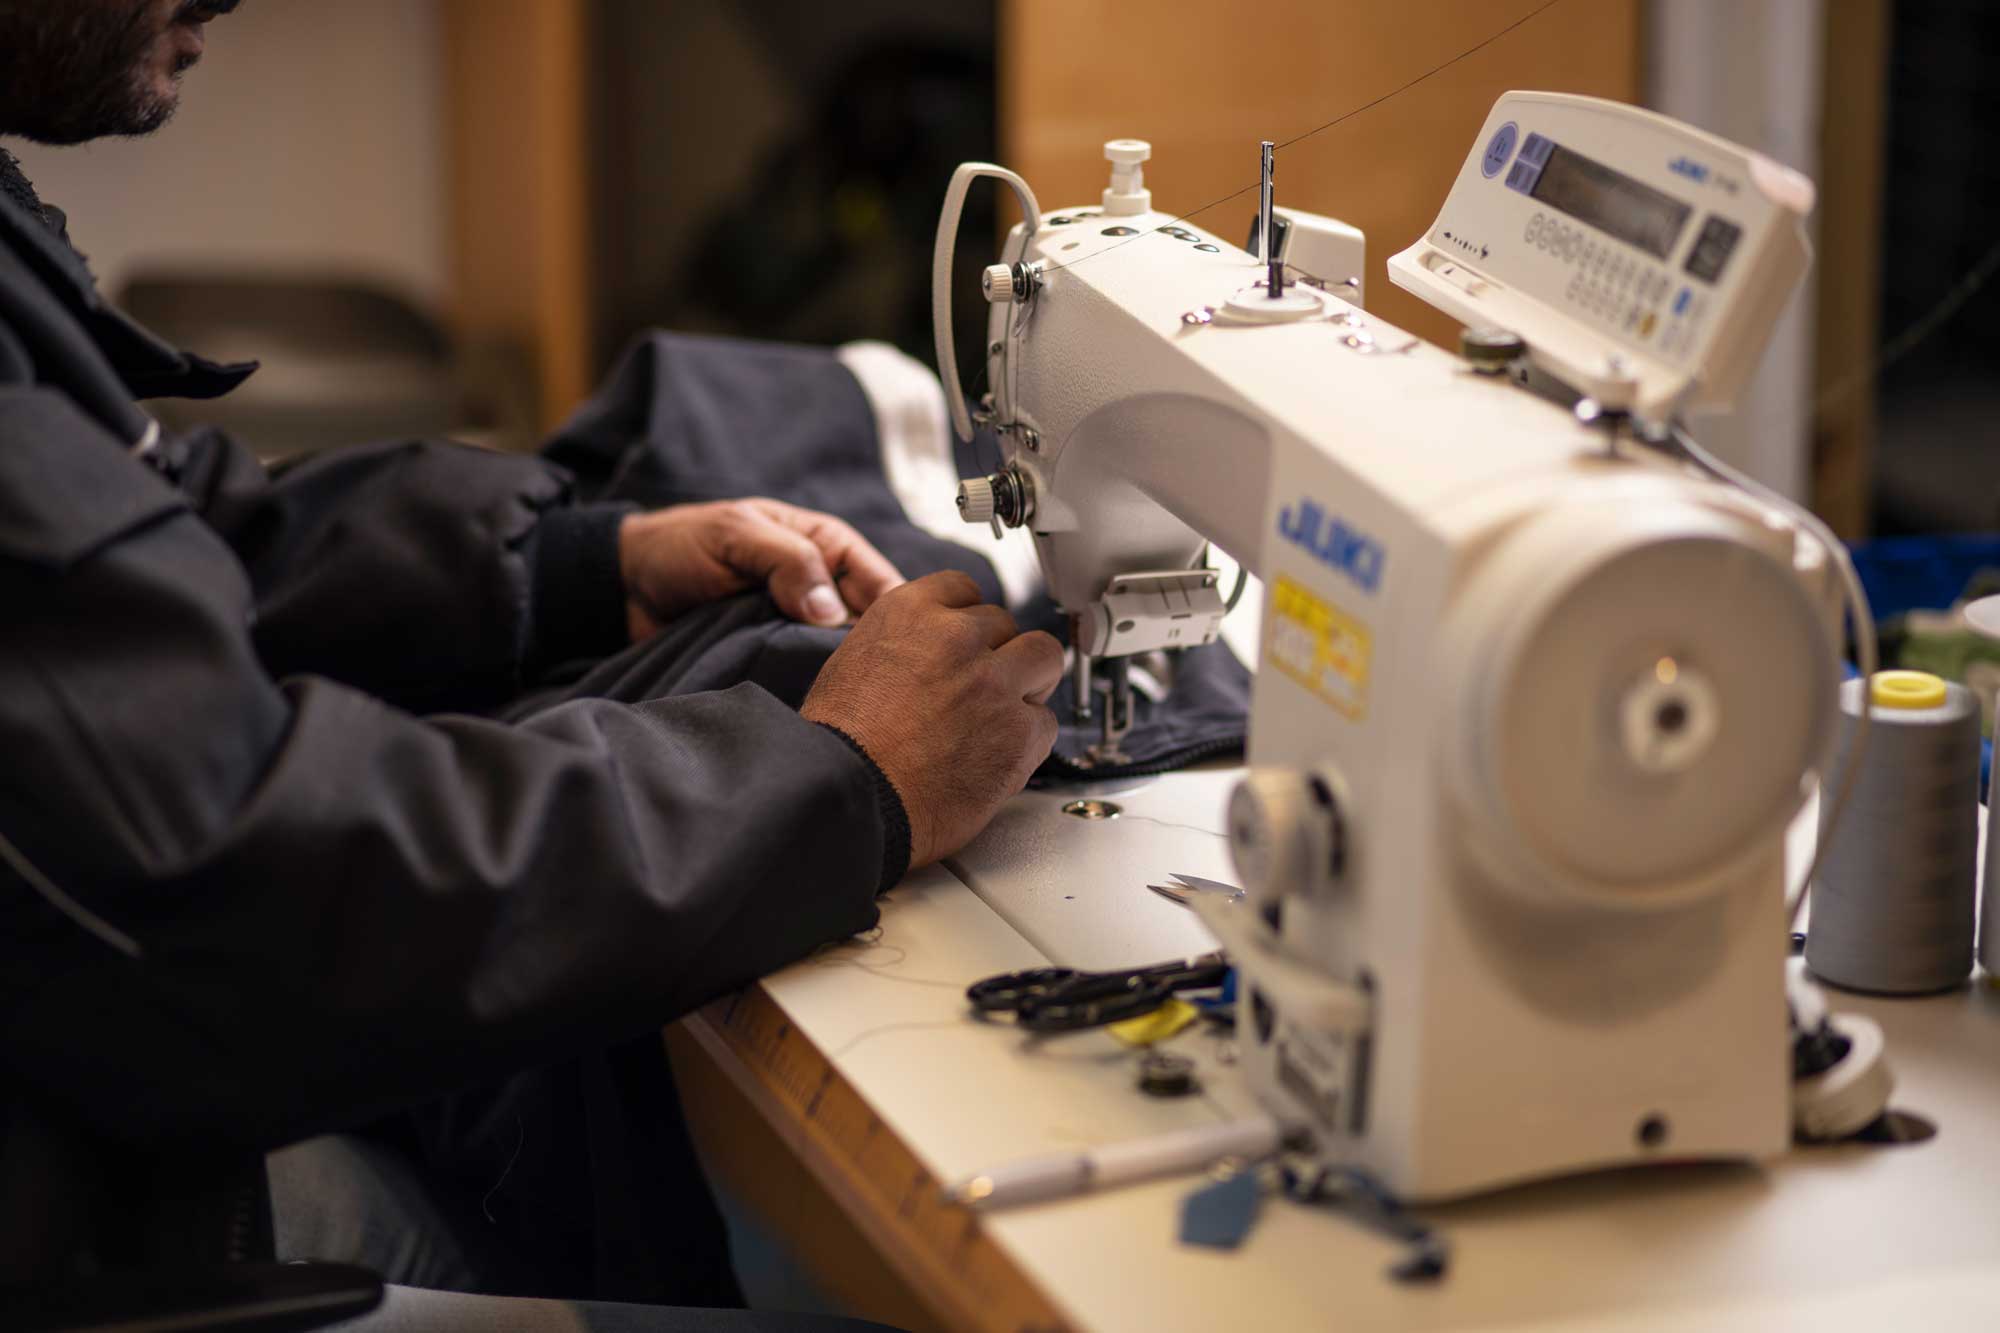 A person is using a sewing machine of some fabric.